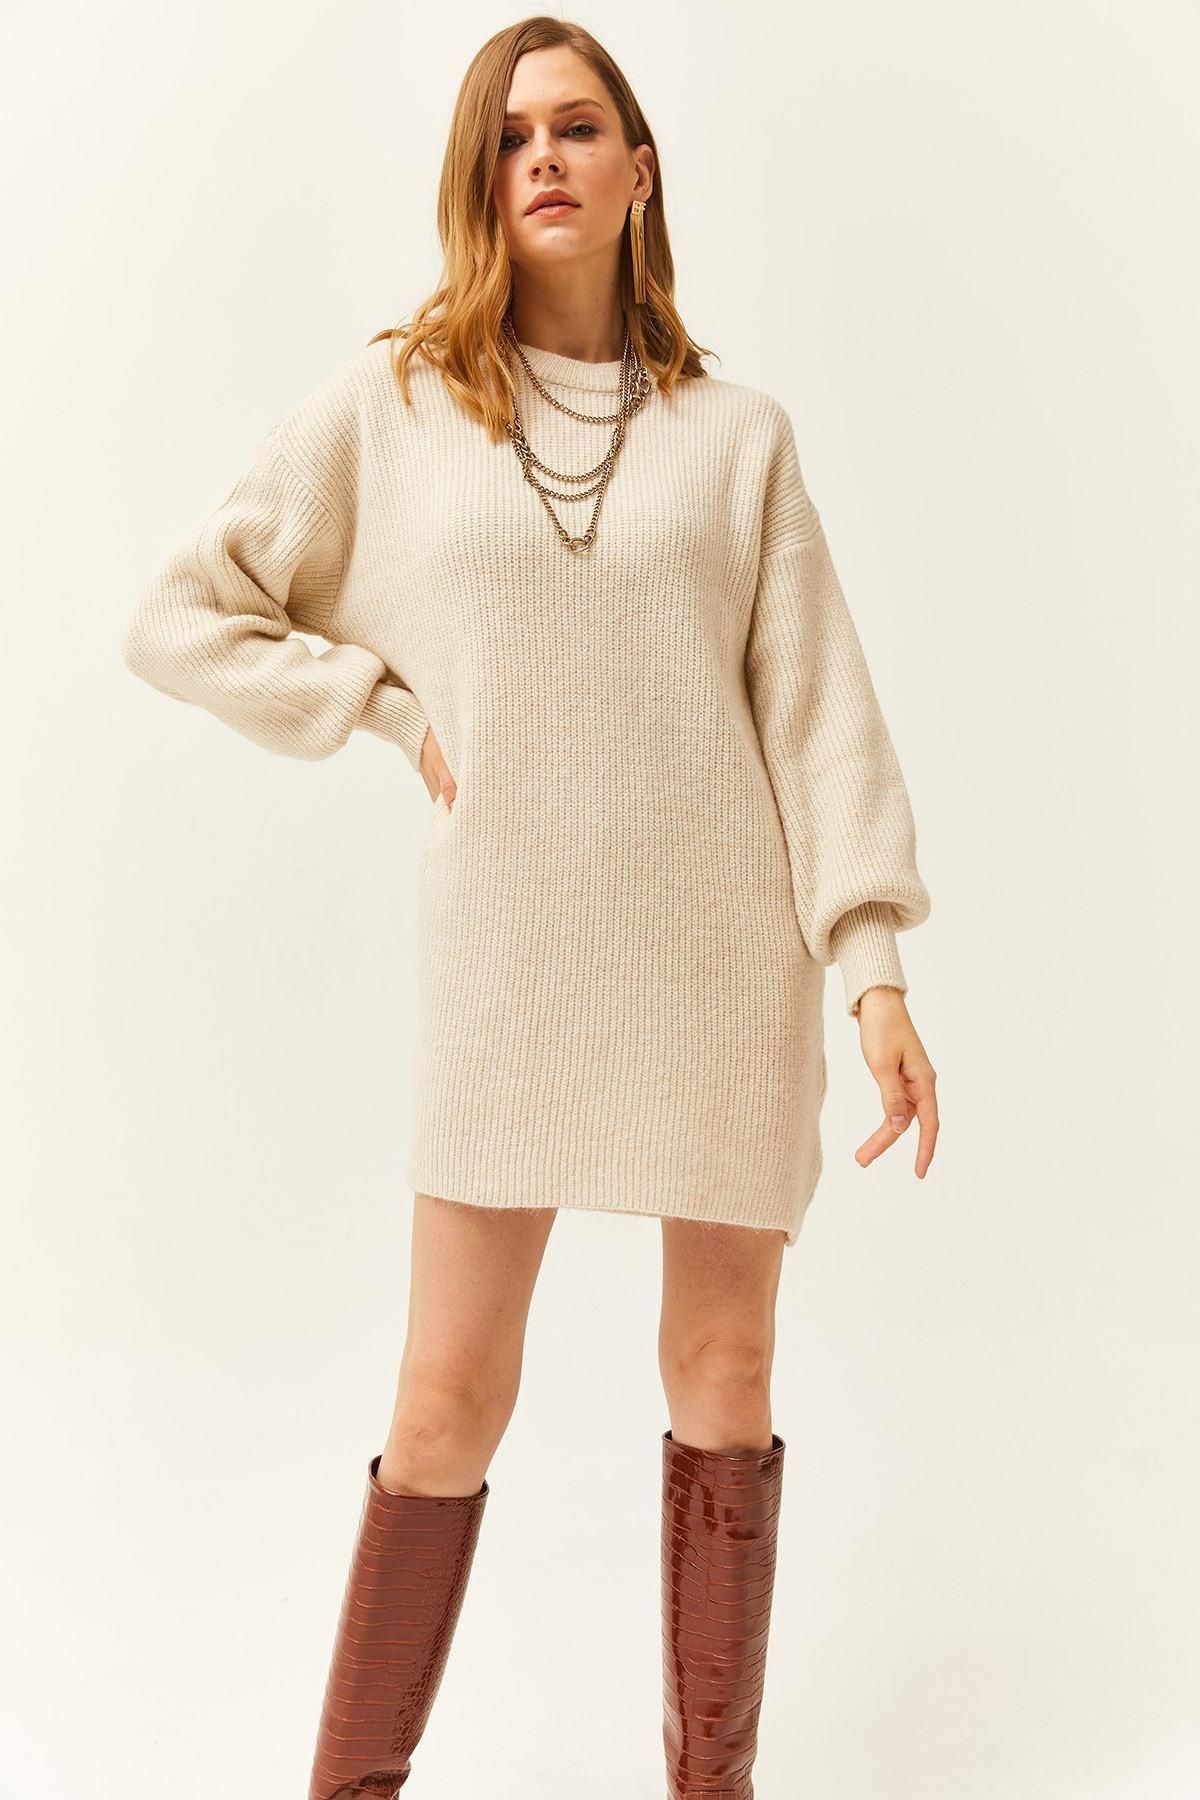 Olalook - Beige Crew Neck Knitted Tunic Dress